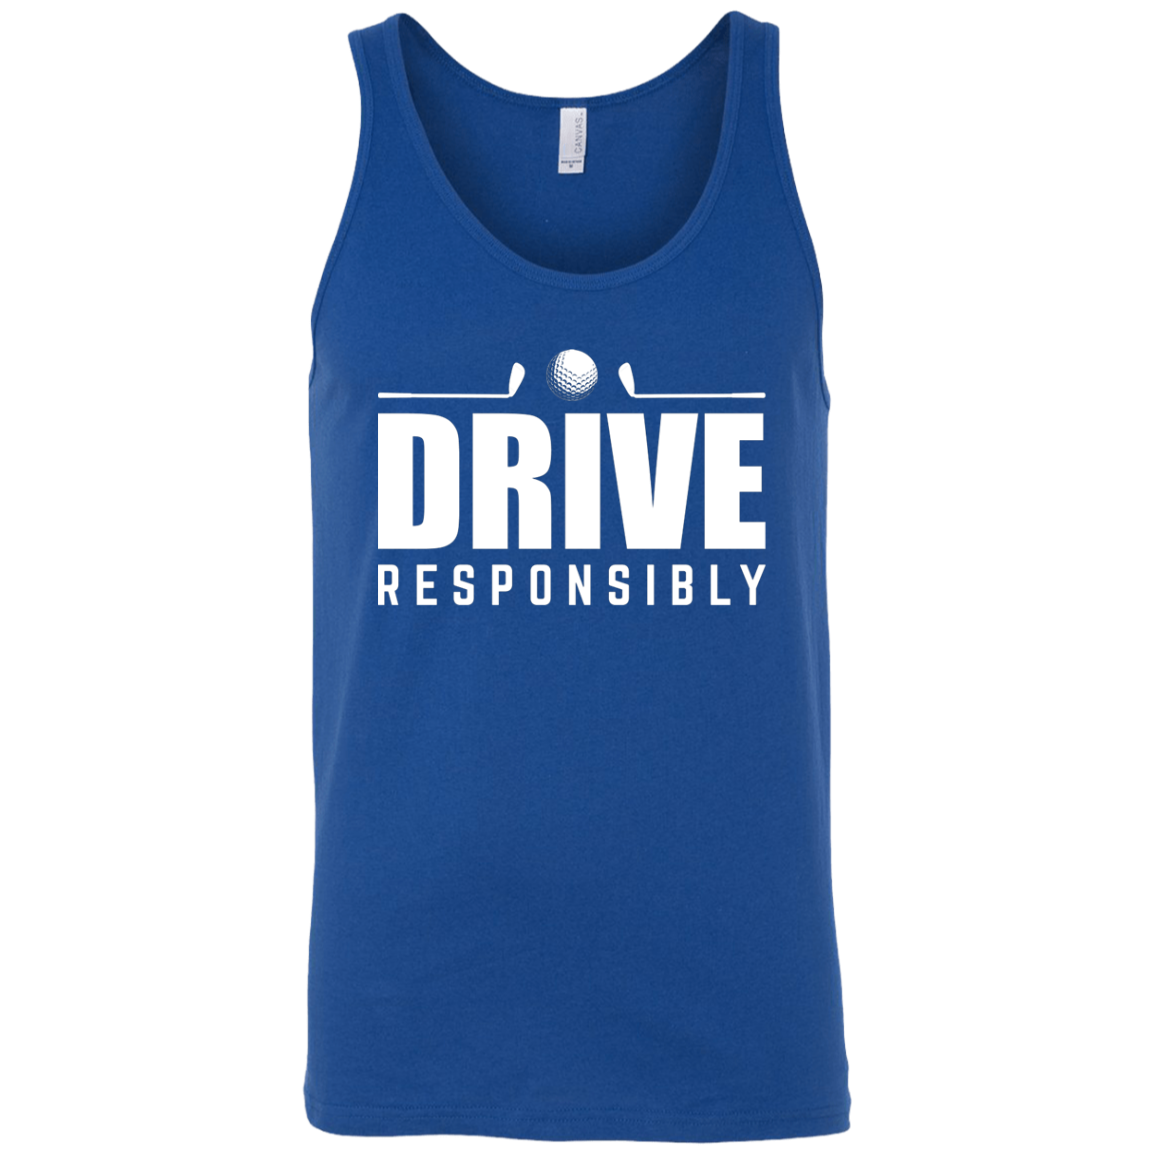 Drive Responsibly Tank Top Apparel - The Beer Lodge